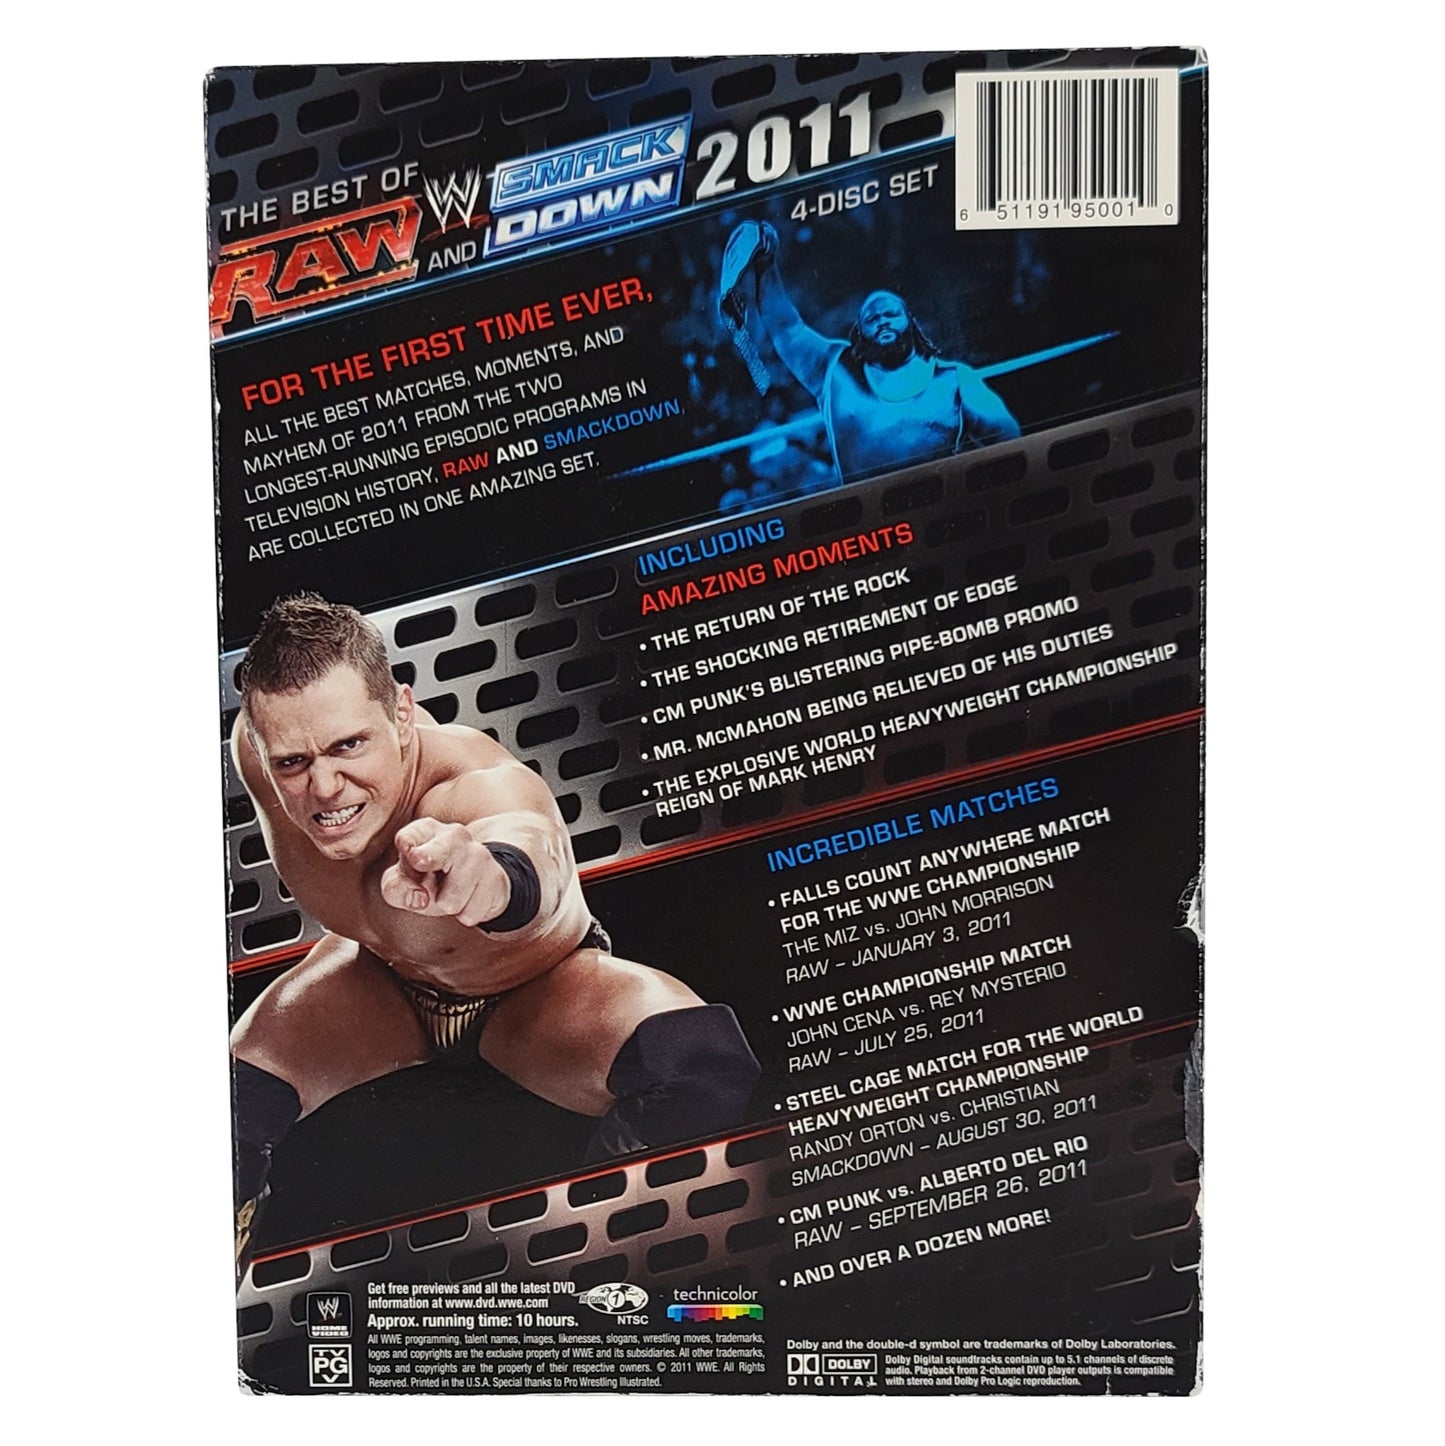 WWE: The Best Of Raw And Smackdown 2011